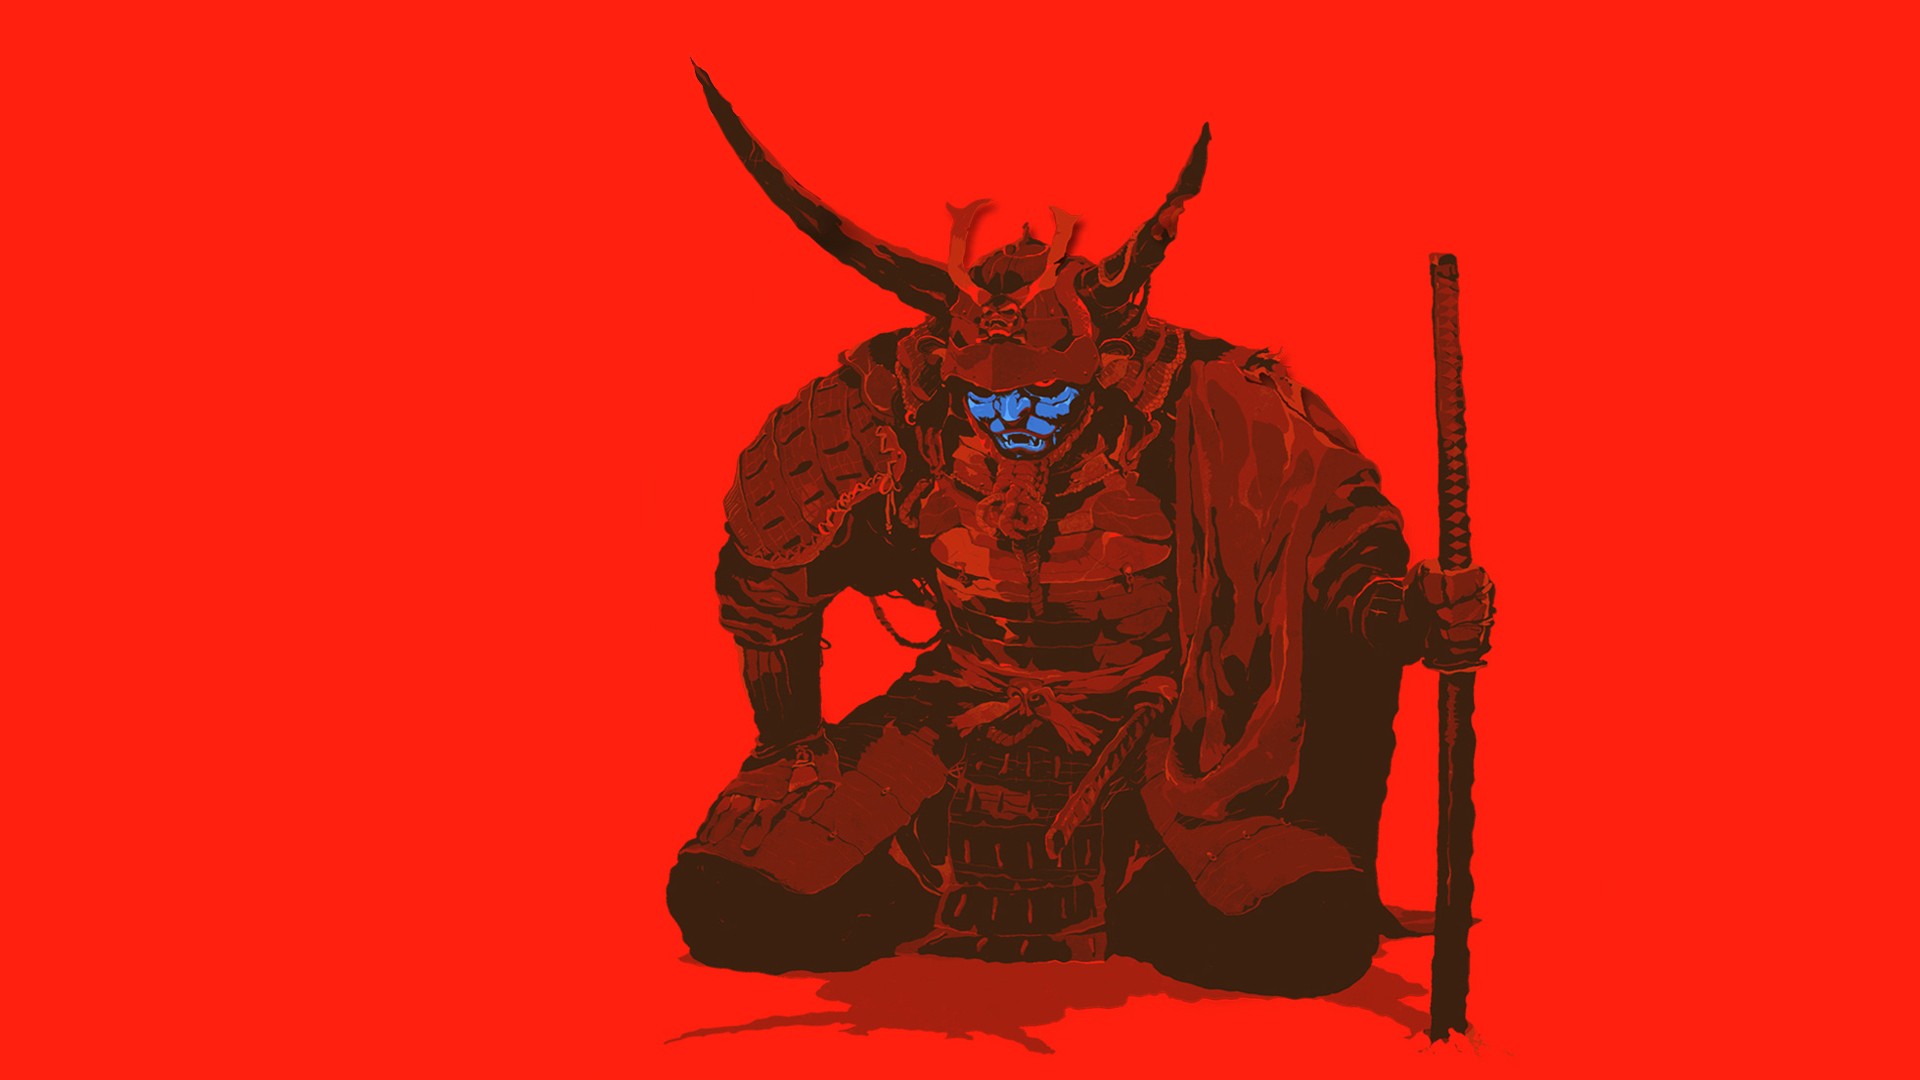 #artwork, #simple Background, #sword, #samurai, #red, - Cannibal Ox Blade Of The Ronin , HD Wallpaper & Backgrounds